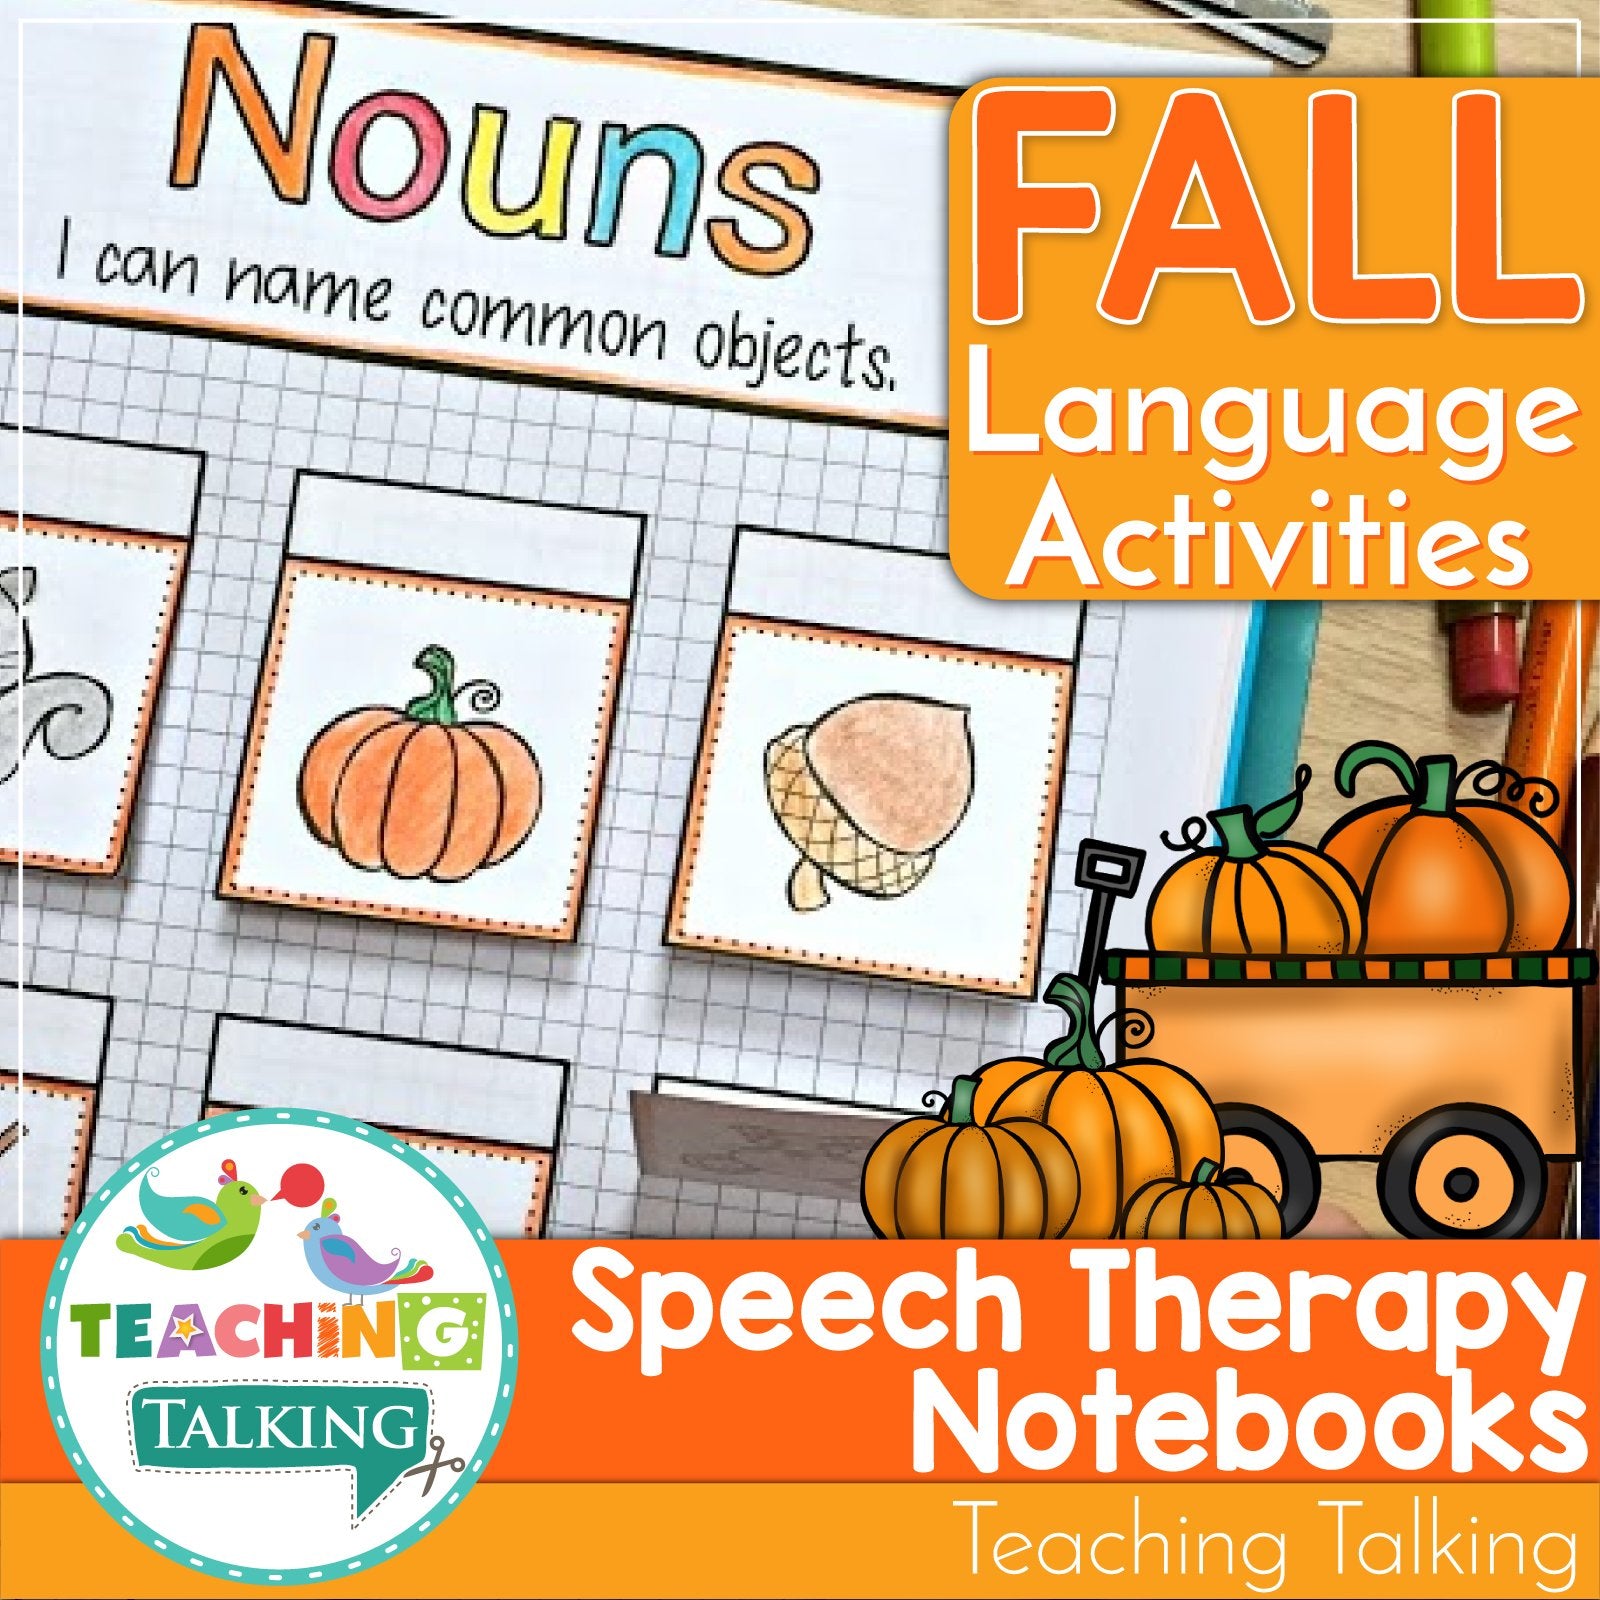 Teaching Talking Printable Speech Therapy Language Notebooks for Fall